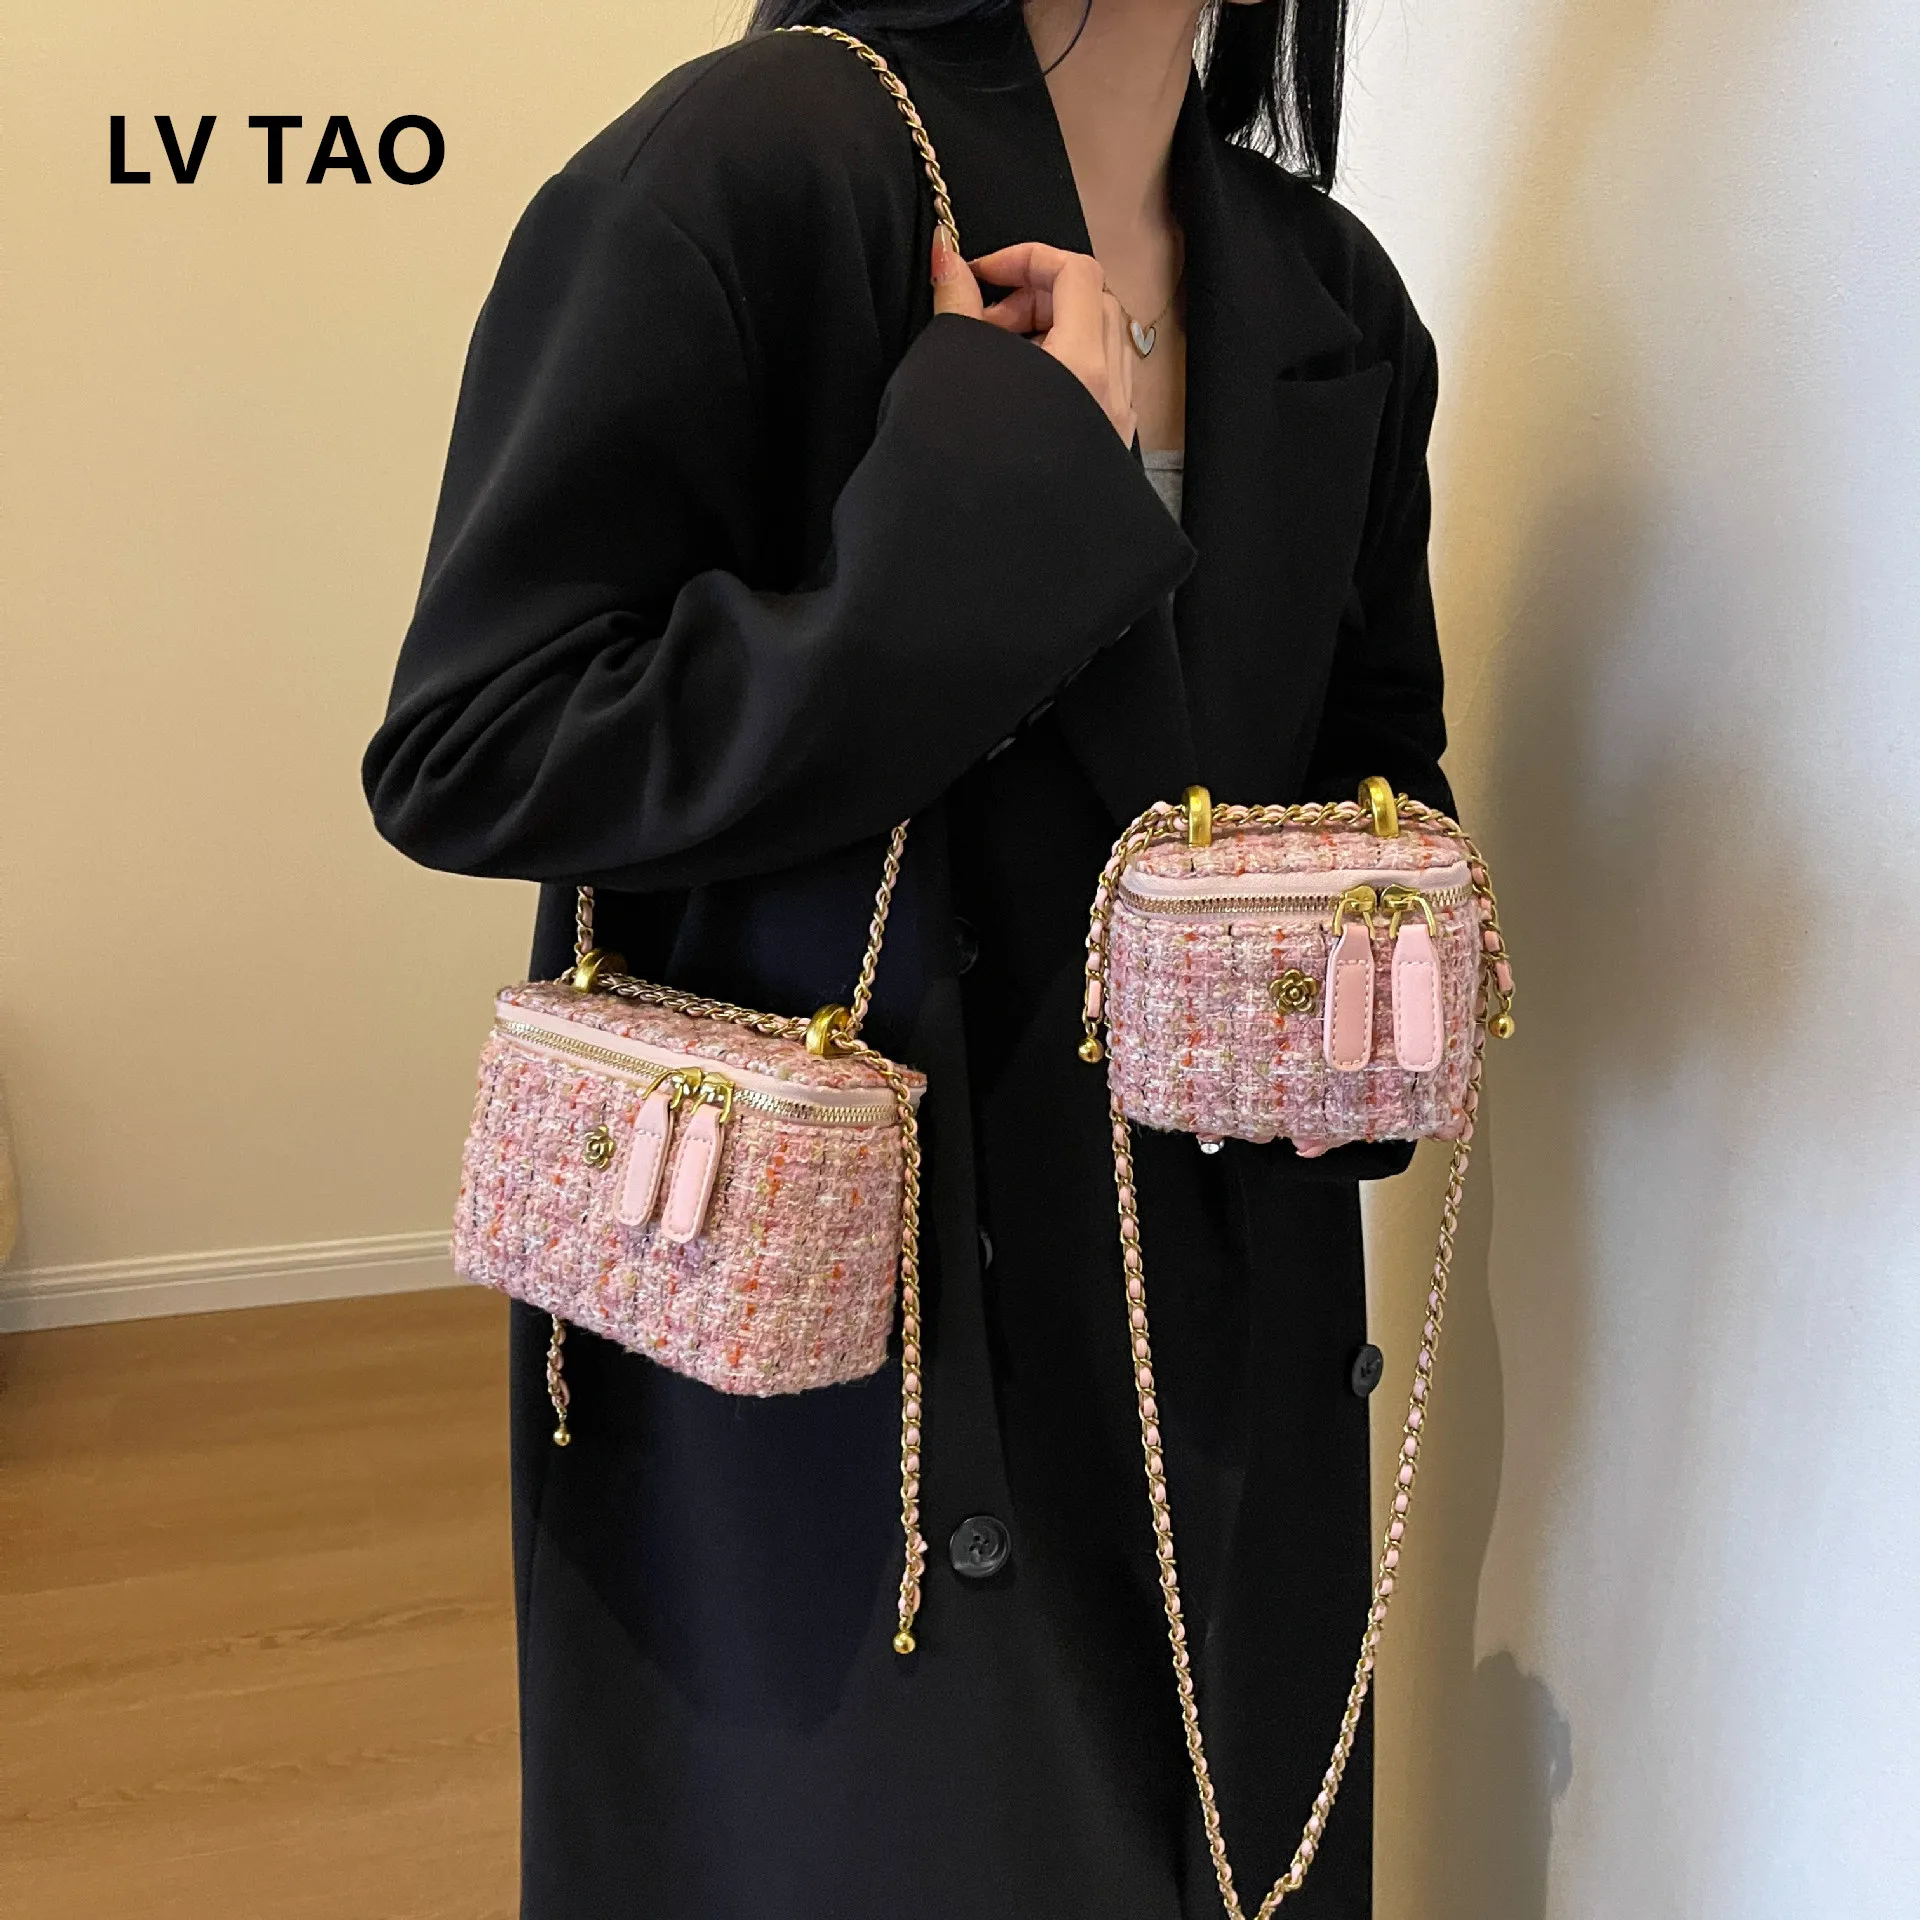 

Women Trendy New Fashion Quilted Chain Luxury Crossbody Bags Brand Designer Handbags and Purses Small Shoulder Bag